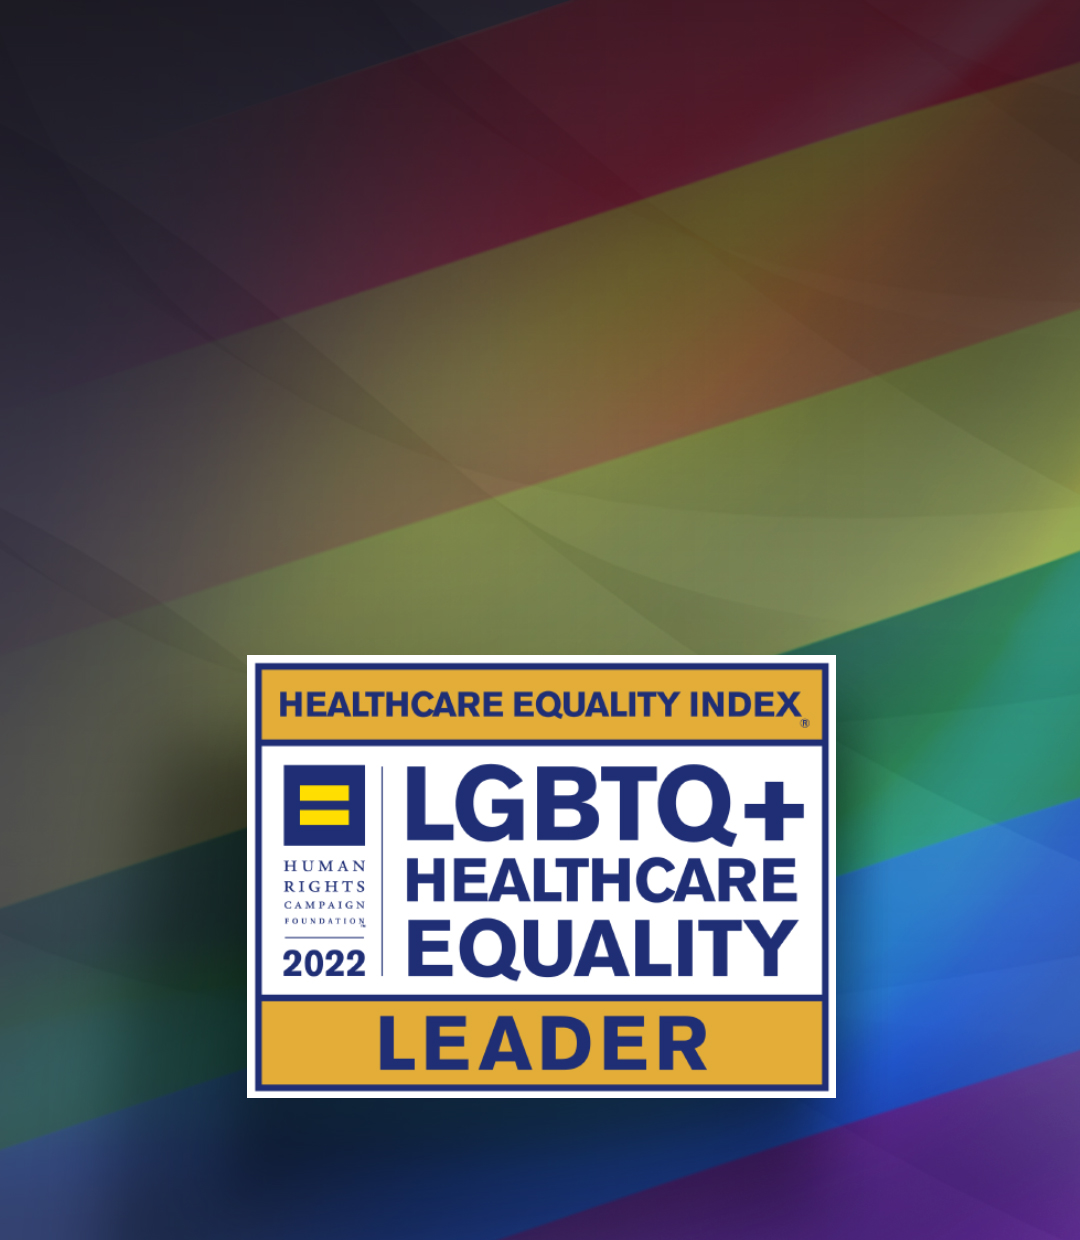 NATIONAL LEADERS IN LGBTQ+ HEALTHCARE EQUALITY